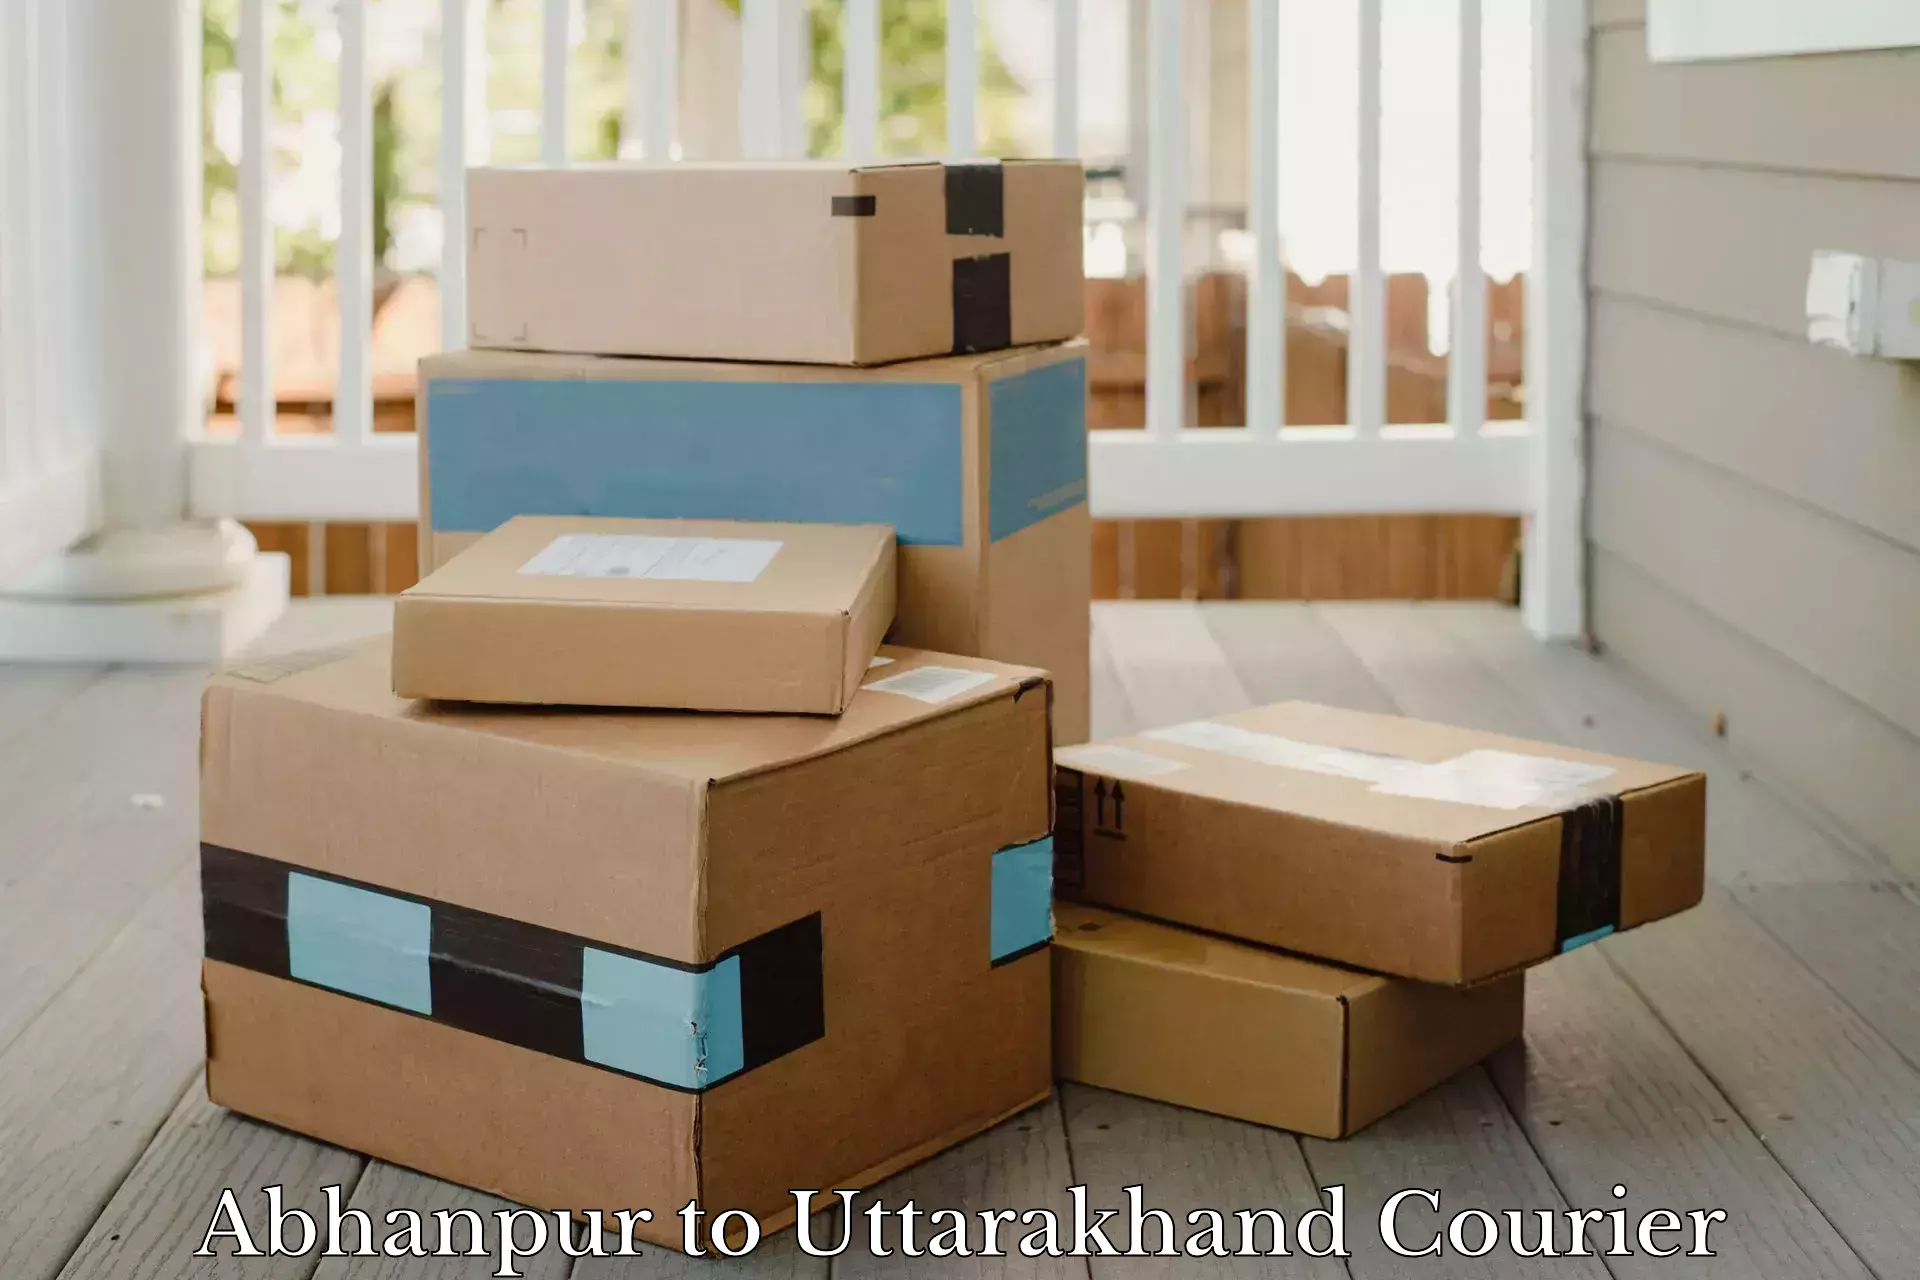 Diverse delivery methods in Abhanpur to Uttarakhand